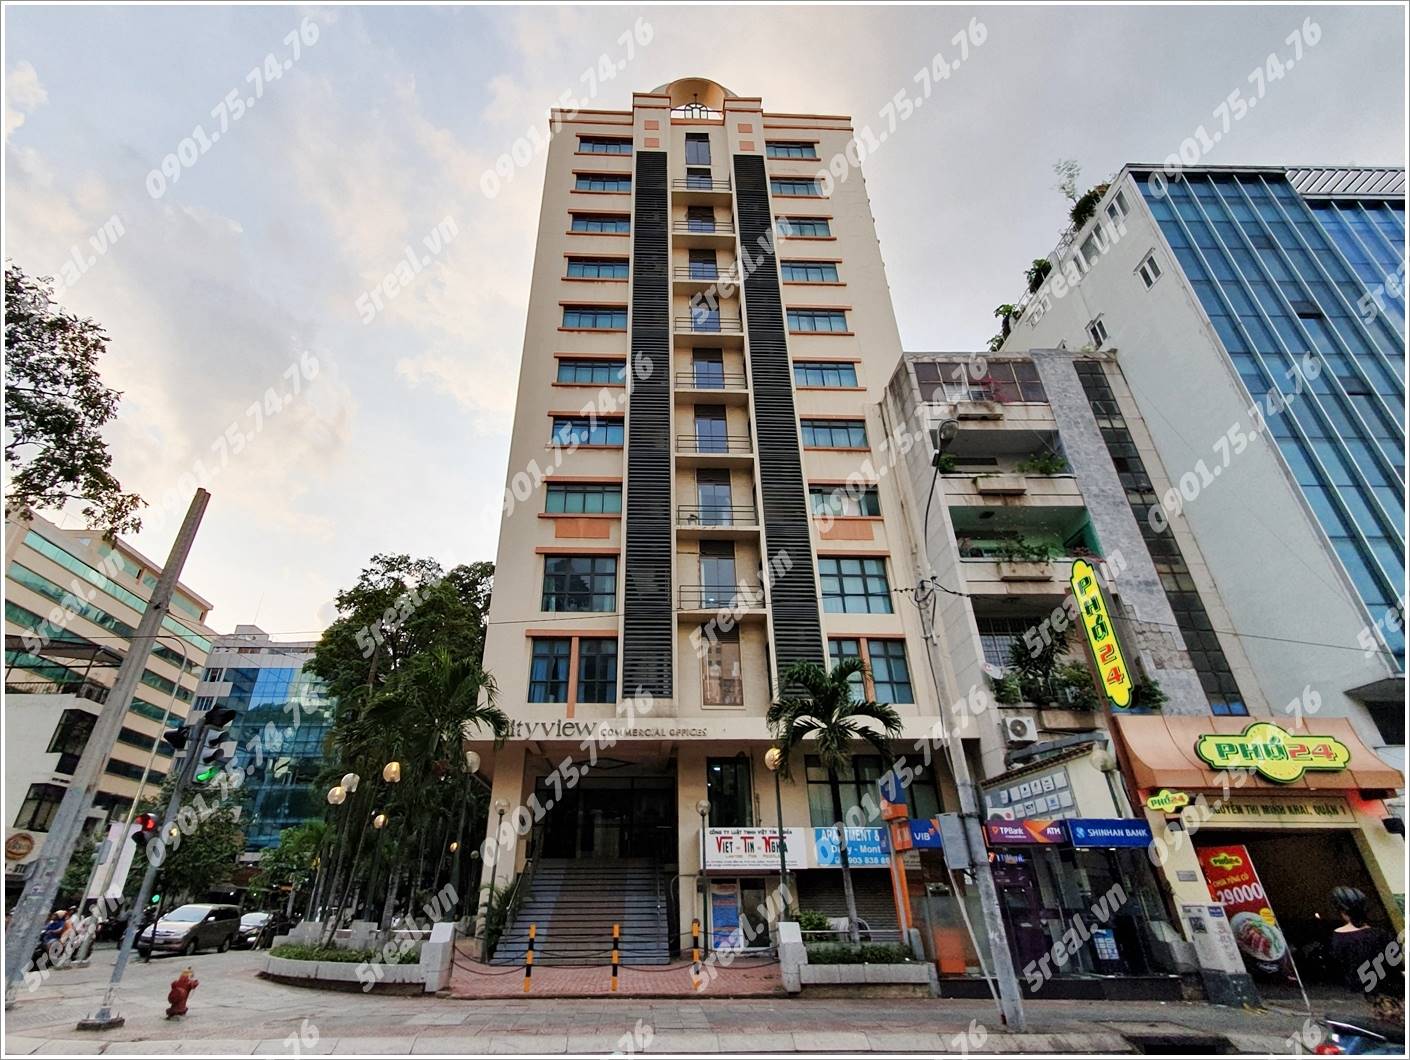 city-view-commercial-office-mac-dinh-chi-quan-1-van-phong-cho-thue-5real.vn-01